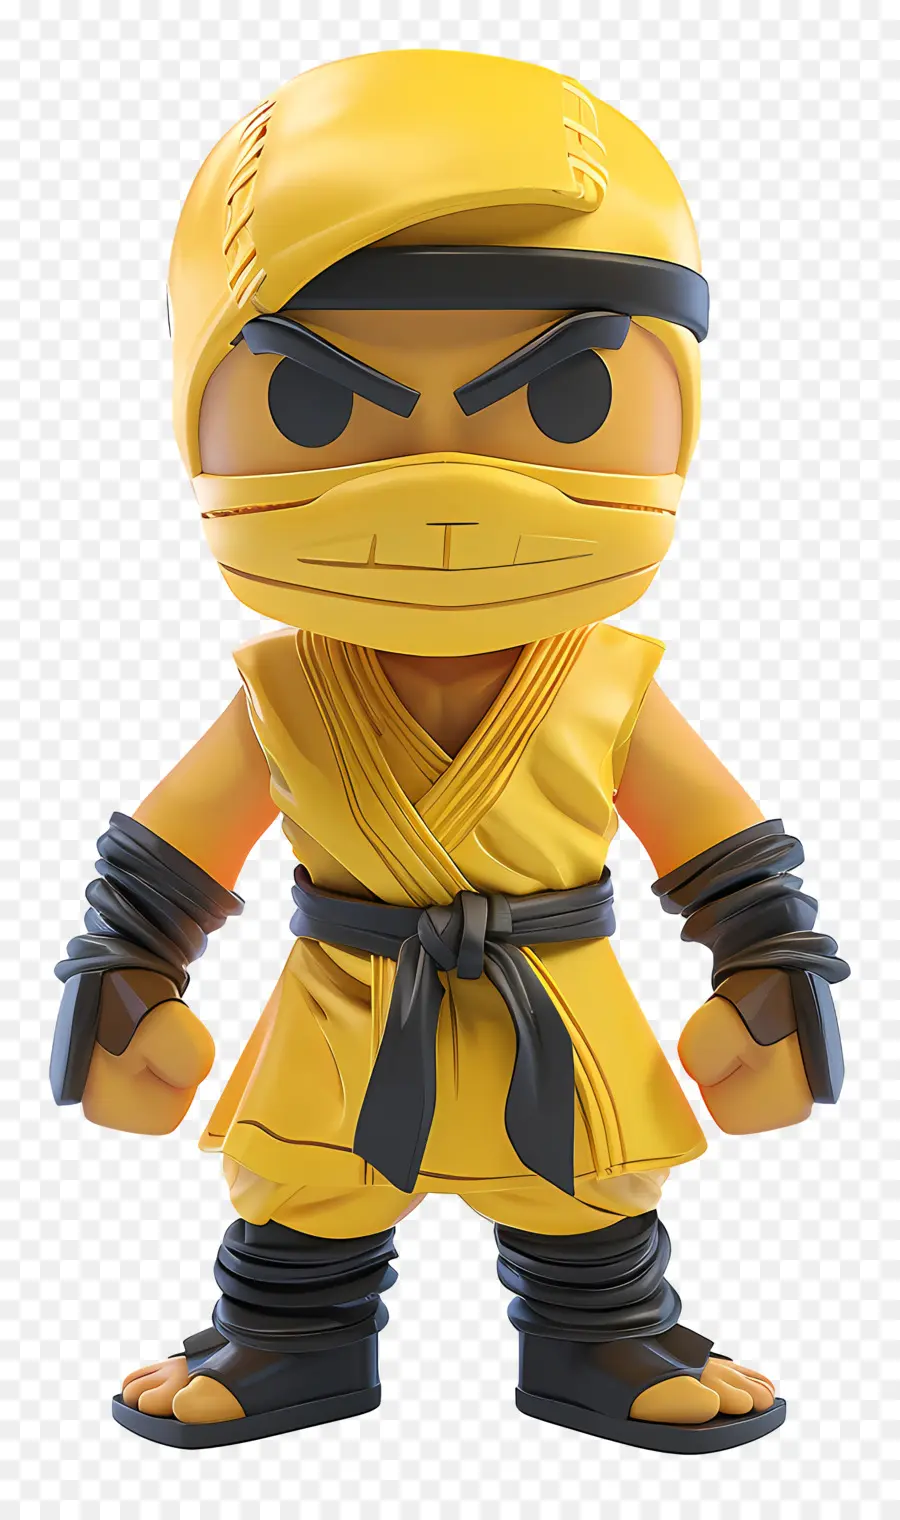 gojo action figure toy figure karate character yellow karate outfit black gloves